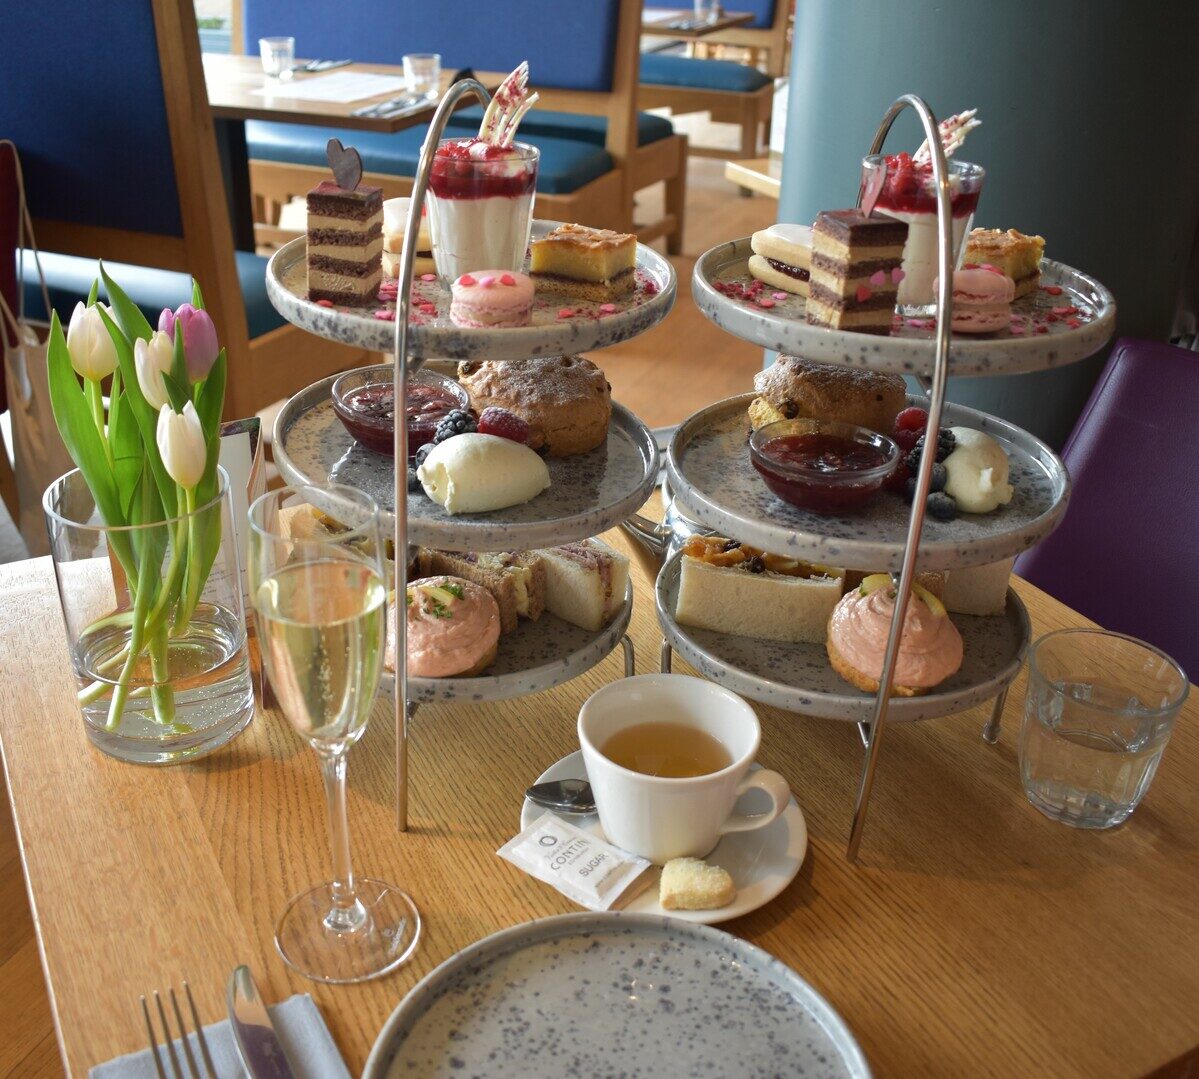 The Scottish Cafe Afternoon Tea